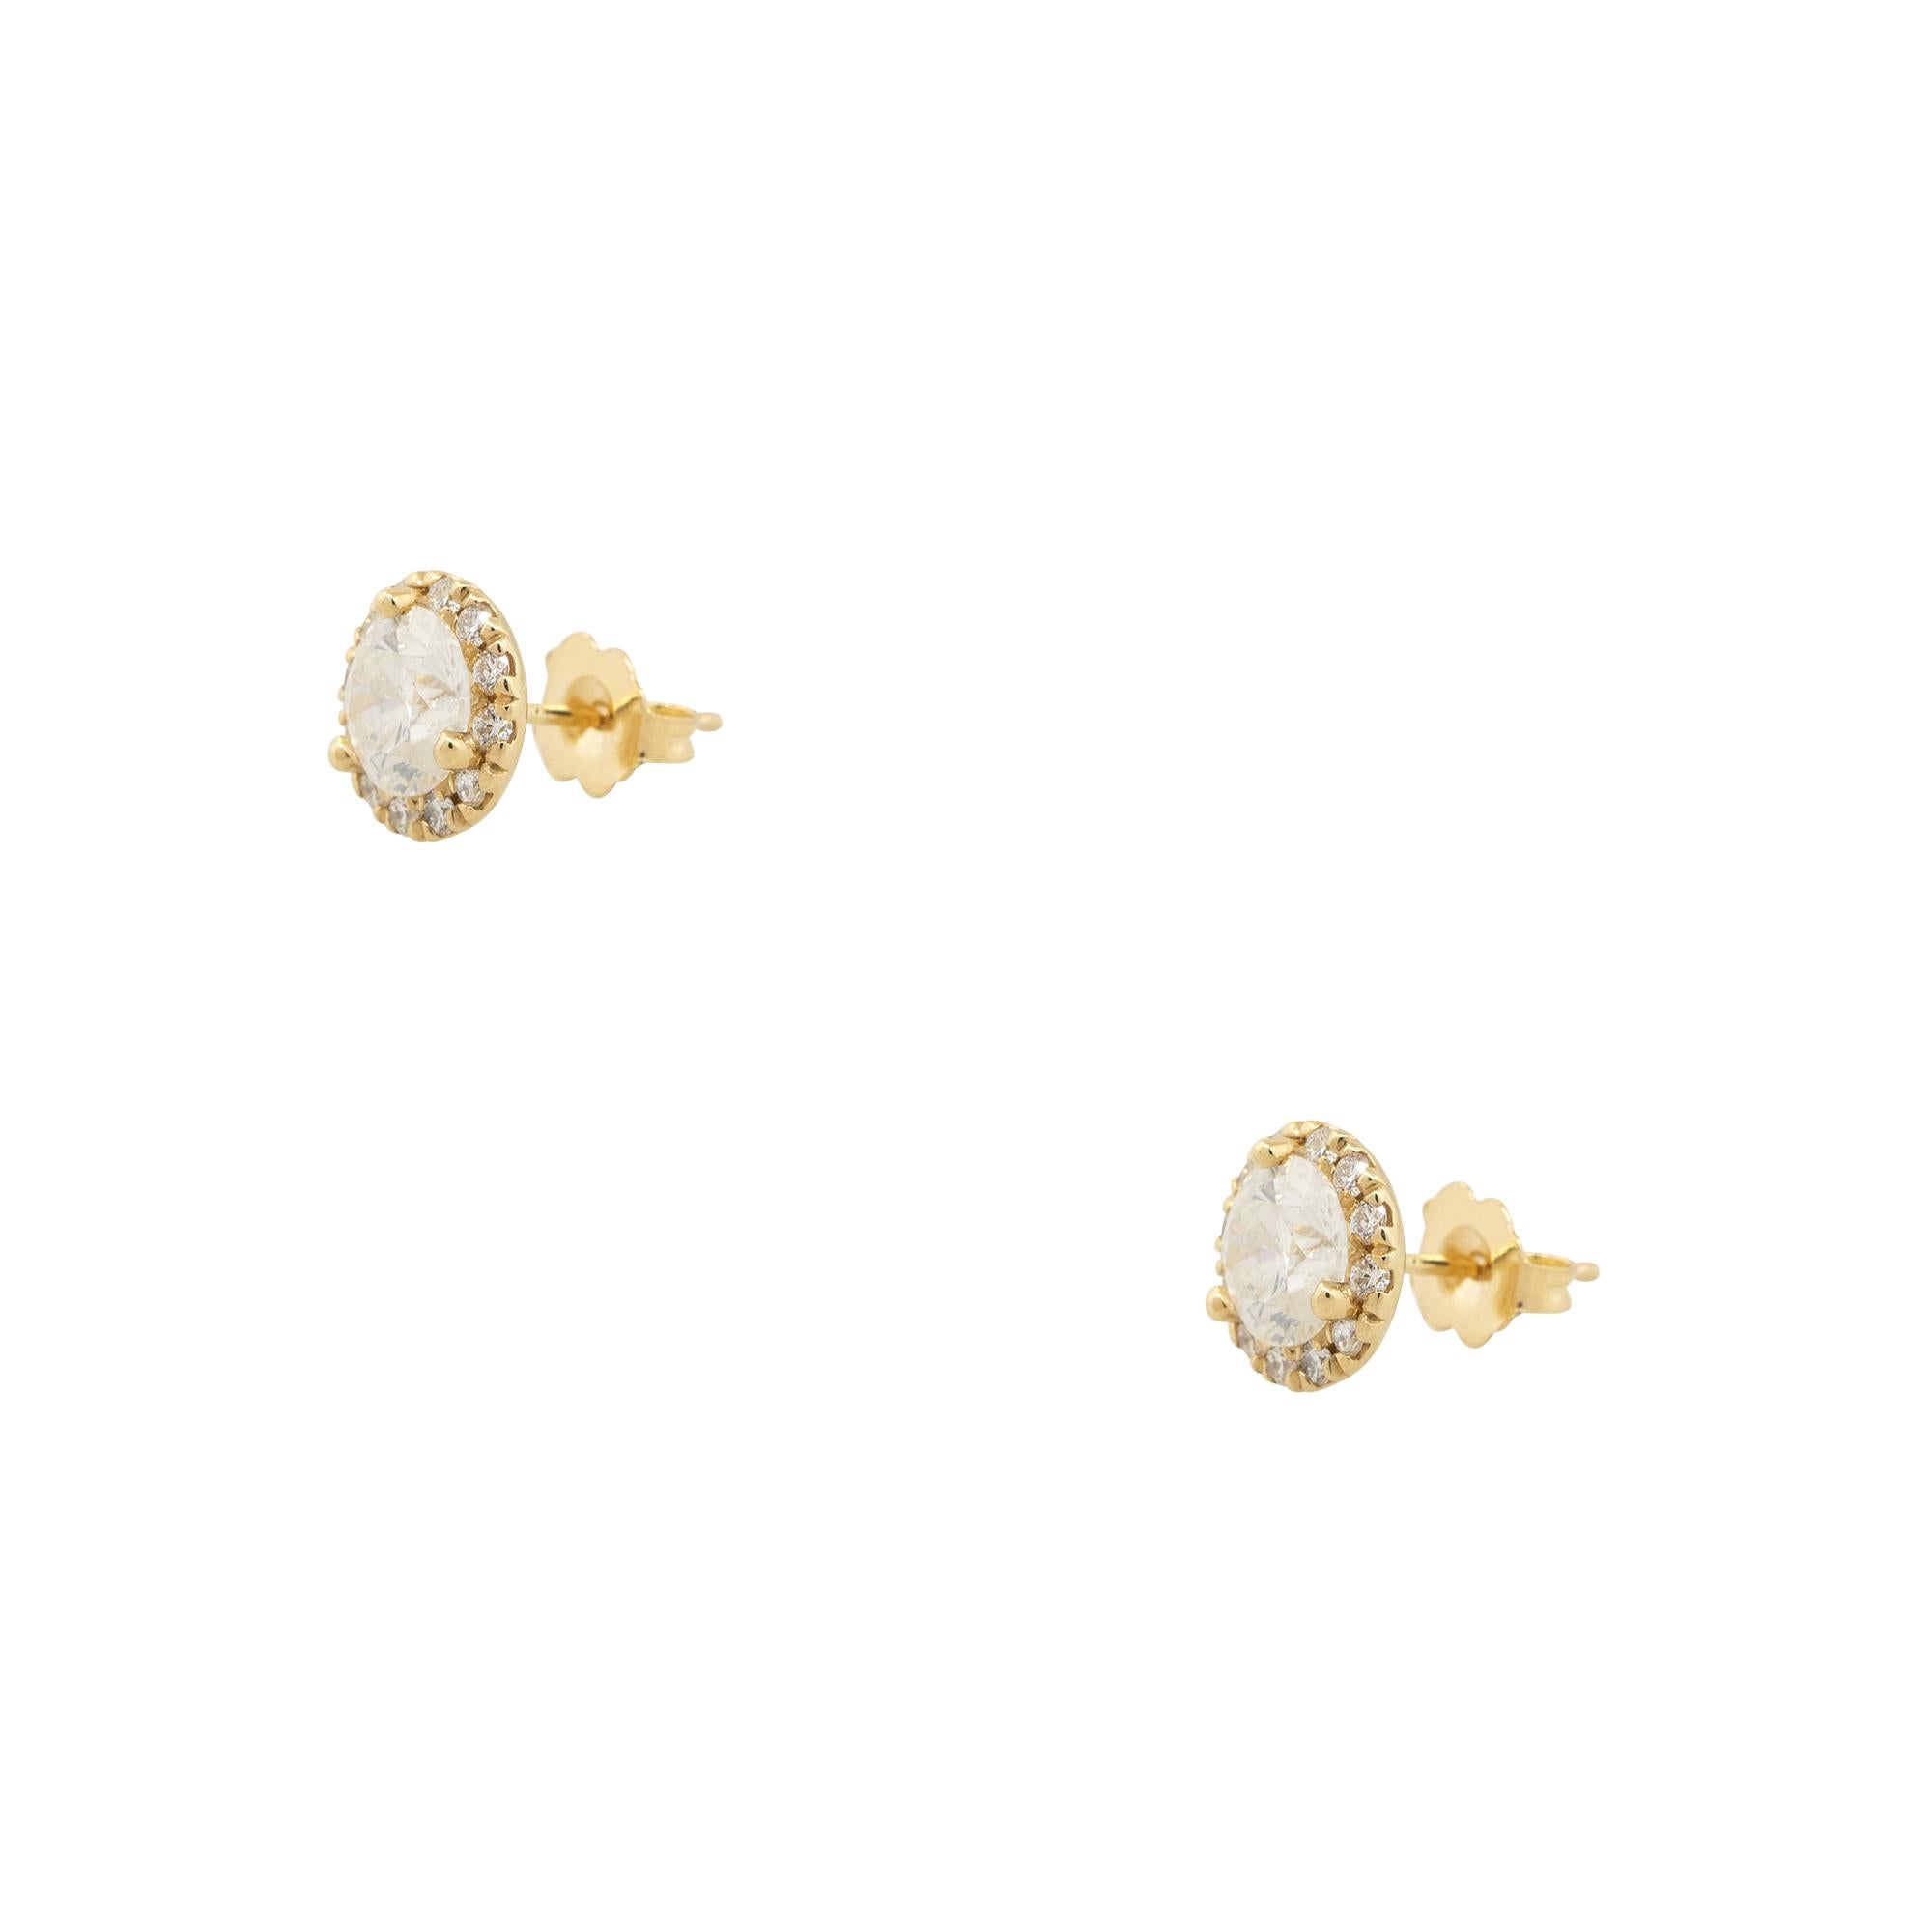 Material: 14k Yellow Gold
Diamond Details: Approx. 2.38ctw of round cut Diamonds. Diamonds are G/I in color and I2/I3 in clarity. One Diamond has a GIA Certificate (GIA 6193692968)
Total Weight: Unknown
Earring Backs: Friction Backs
Additional